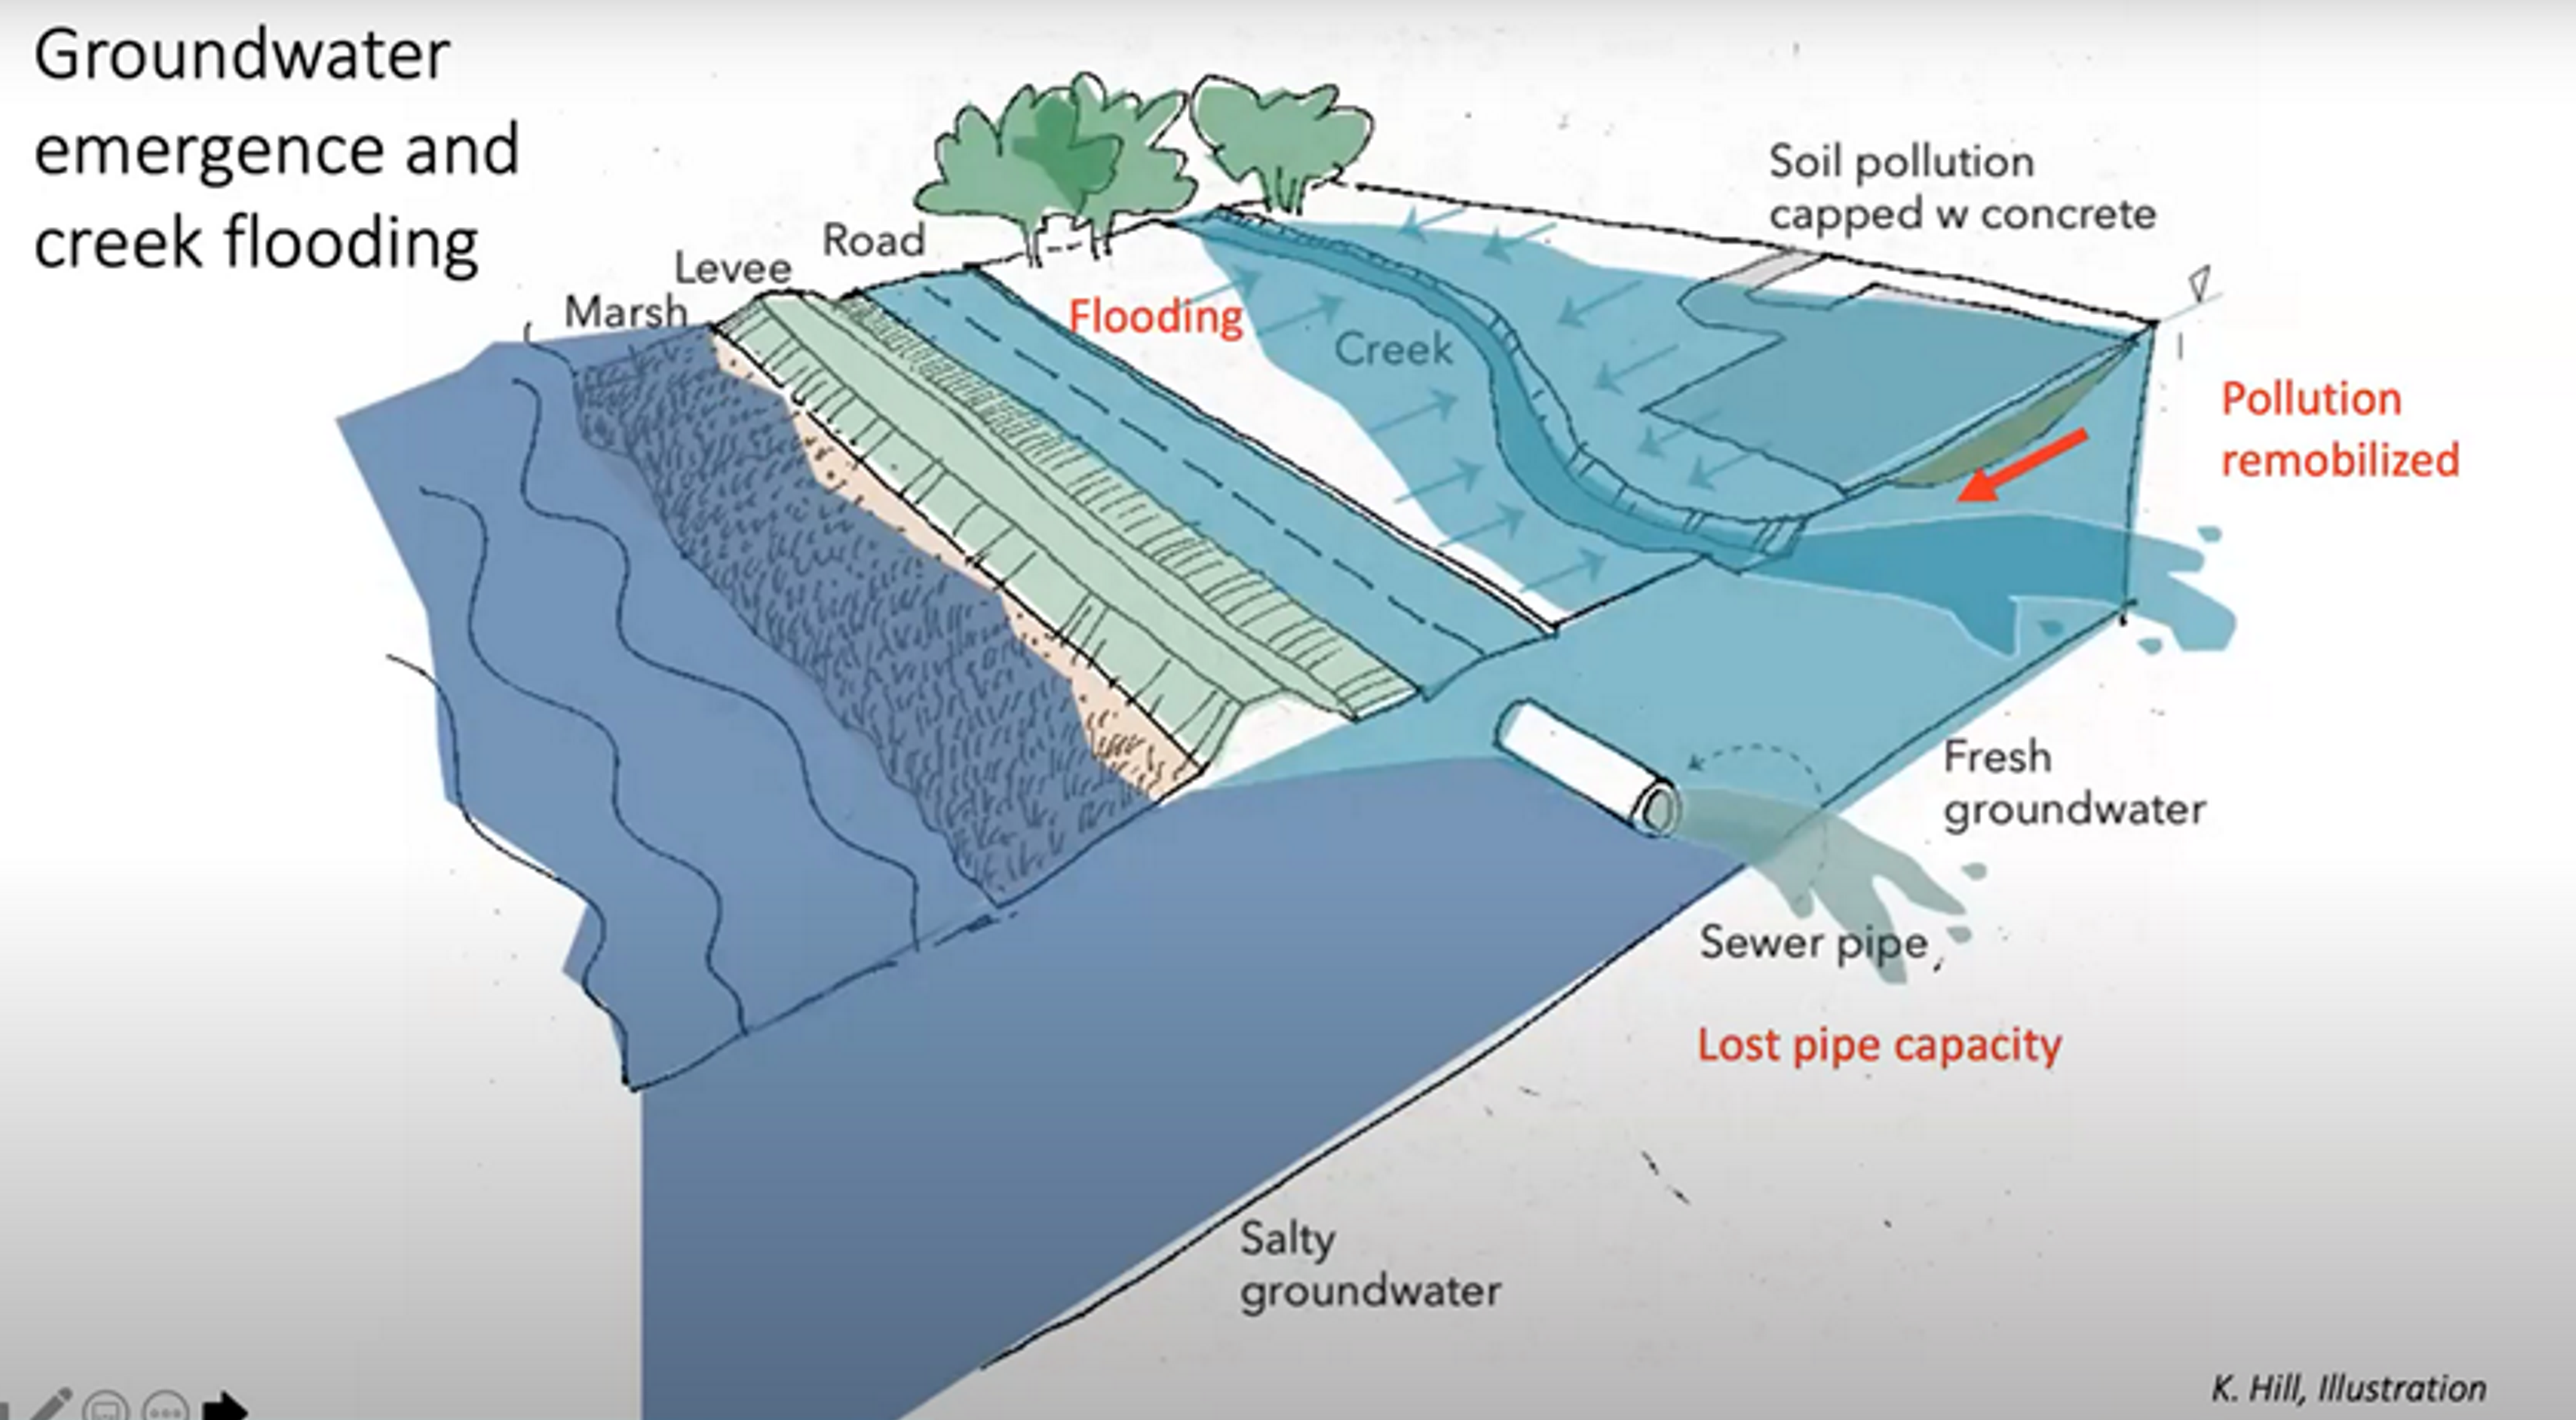 Slide from Dr. Kristina Hill's presentation with a diagram of groundwater rise